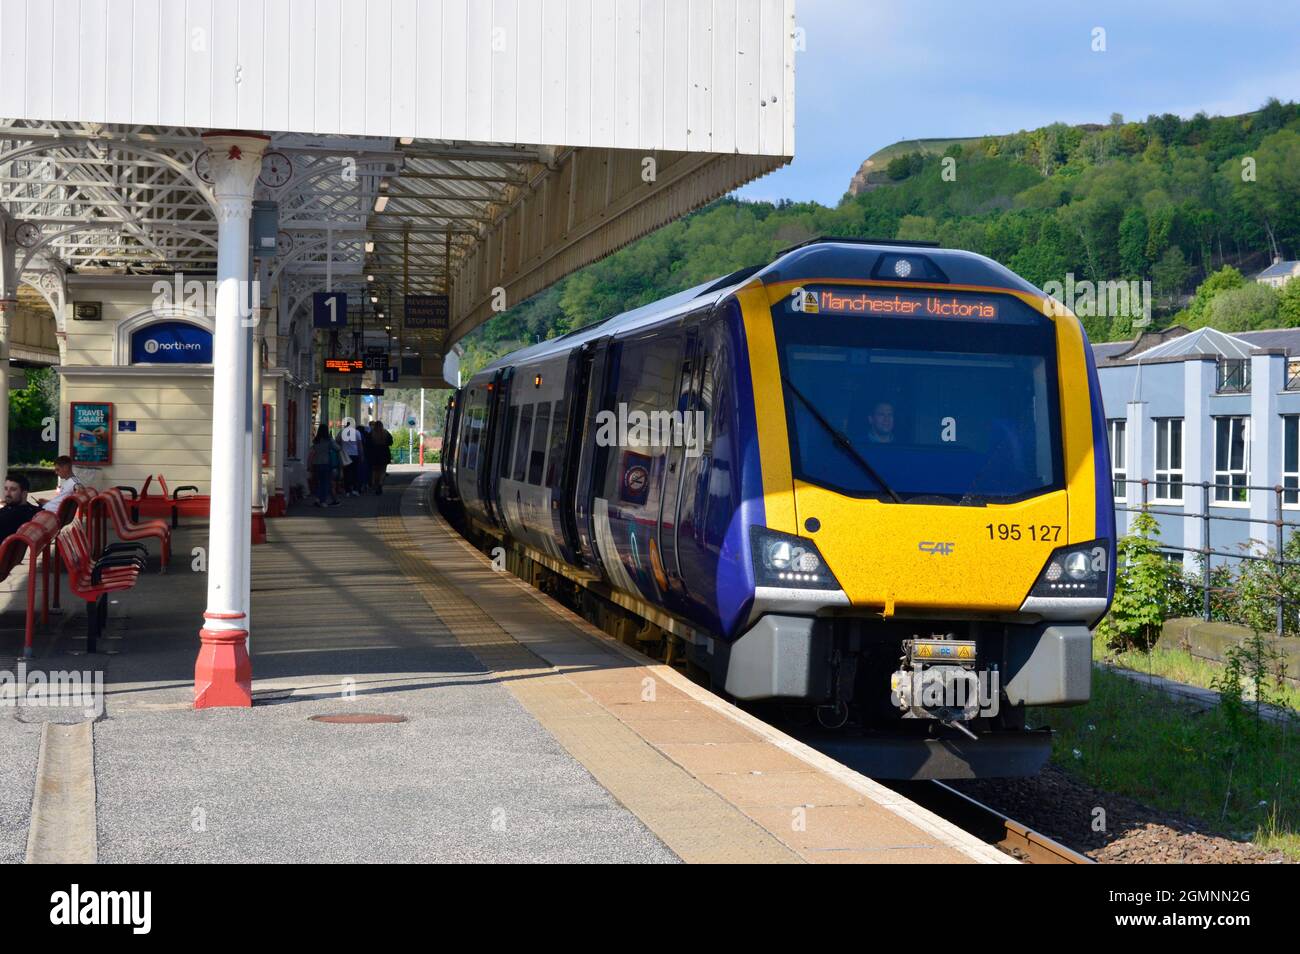 HALIFAX. WEST YORKSHIRE. ENGLAND. 05-29-21. The railway station. Northern Rail DMU 195127 at the platform with a train for Manchester Victoria. Stock Photo